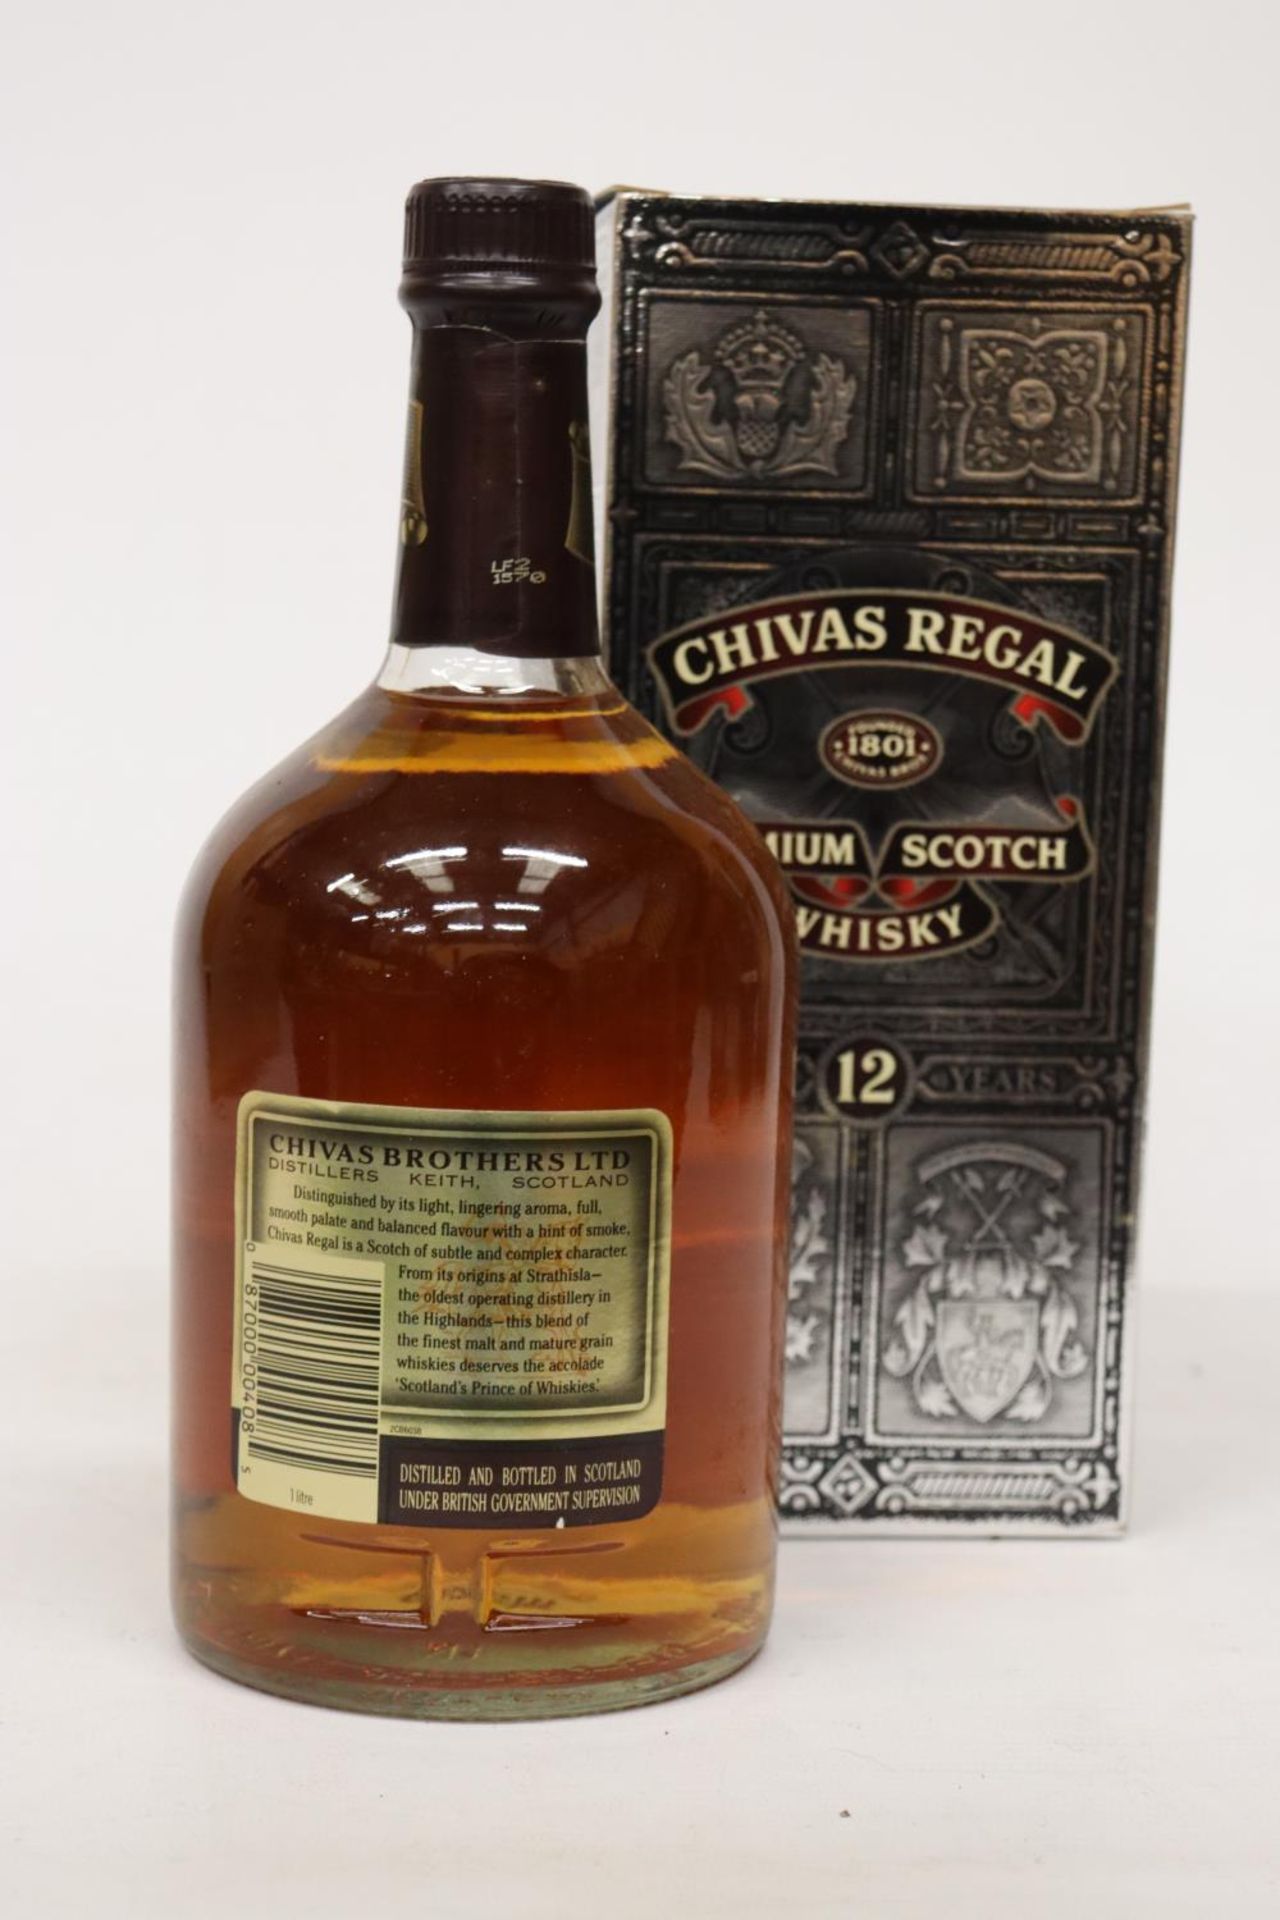 A BOTTLE OF CHIVAS REGAL 12 YEAR OLD WHISKY, BOXED - Image 2 of 5